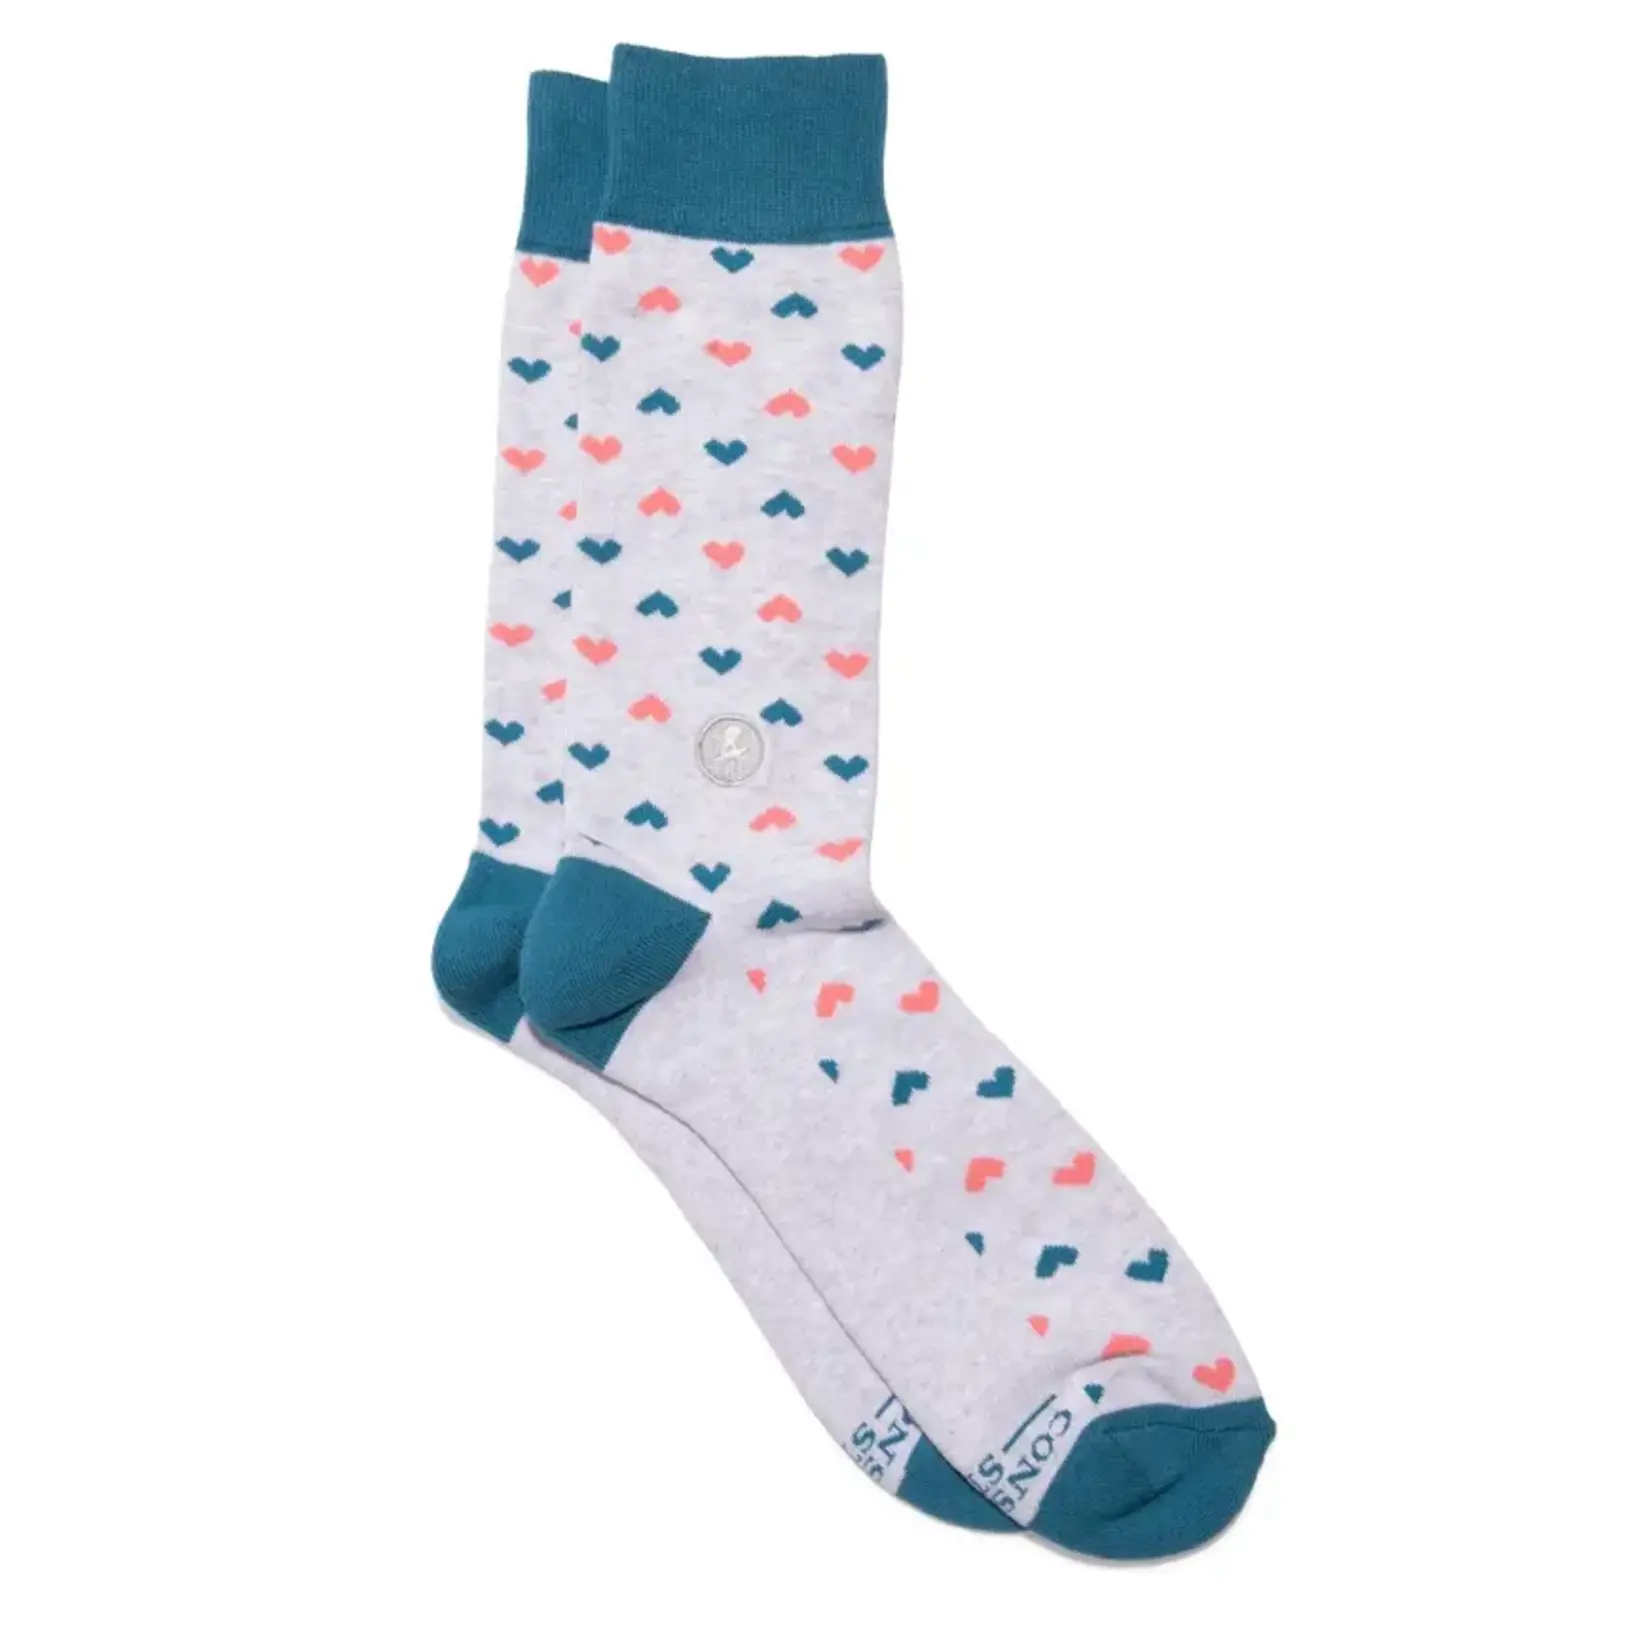 Socks That Find a Cure (Gray Hearts) | Medium